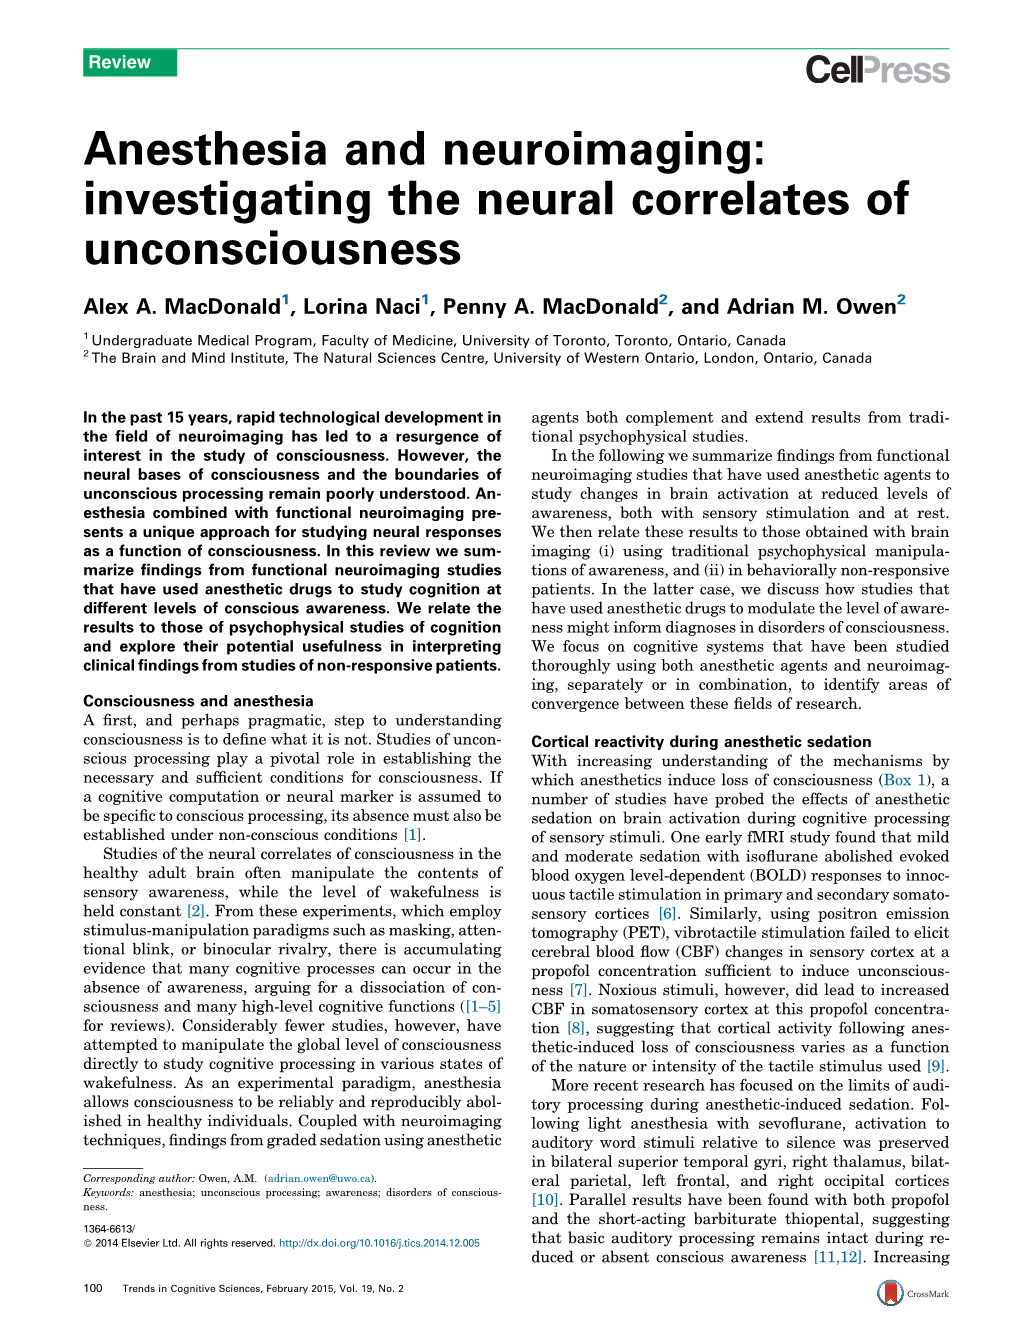 Anesthesia and Neuroimaging: Investigating the Neural